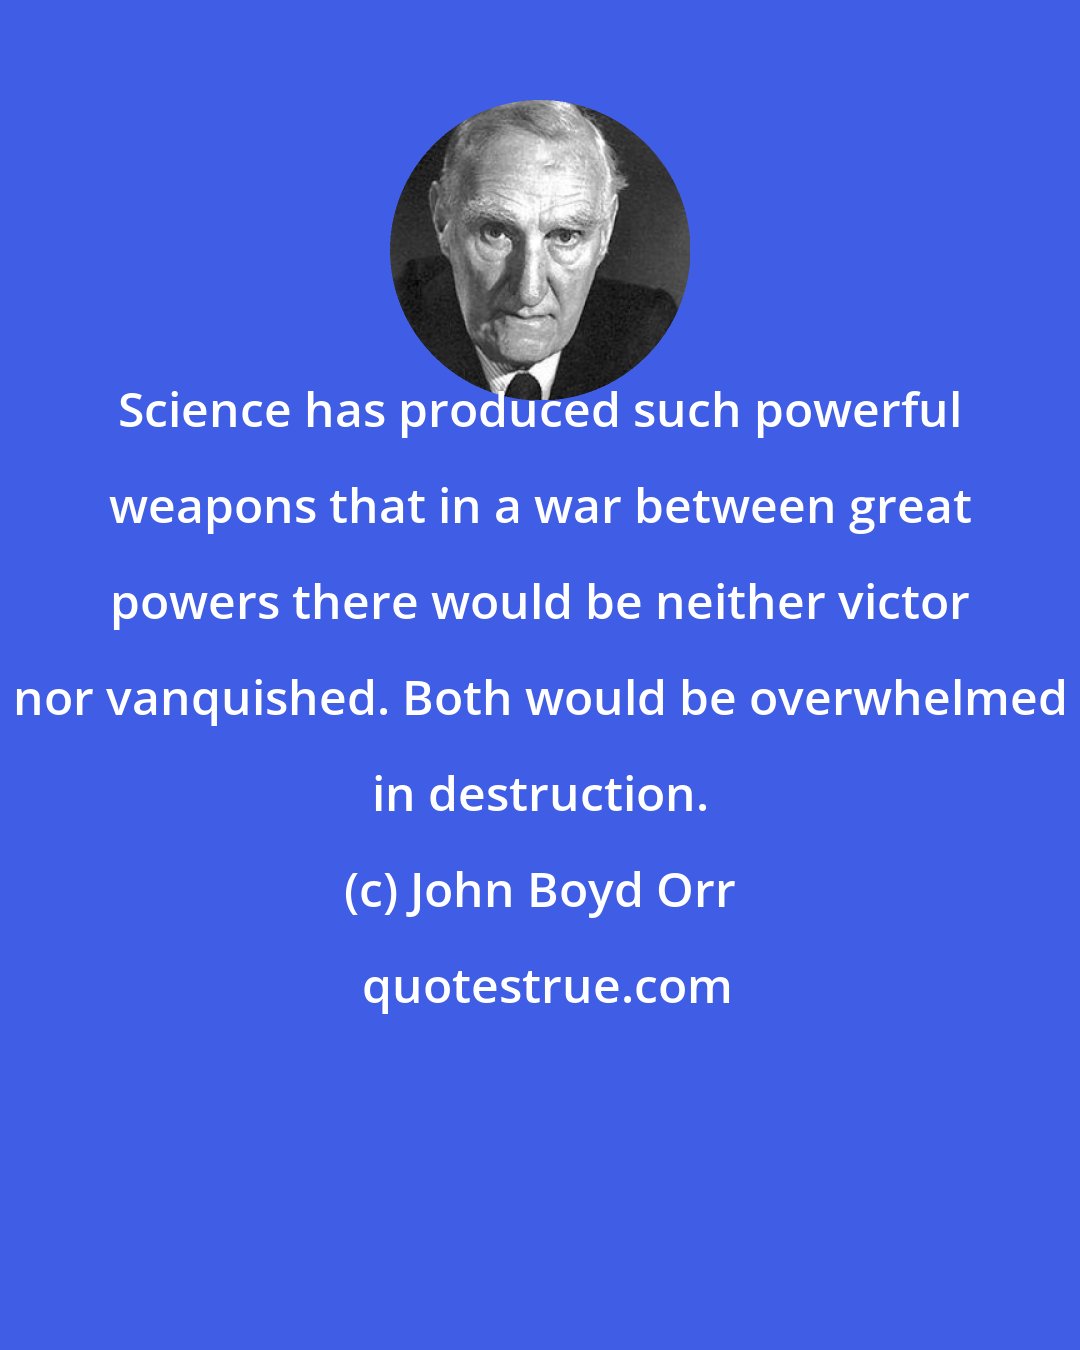 John Boyd Orr: Science has produced such powerful weapons that in a war between great powers there would be neither victor nor vanquished. Both would be overwhelmed in destruction.